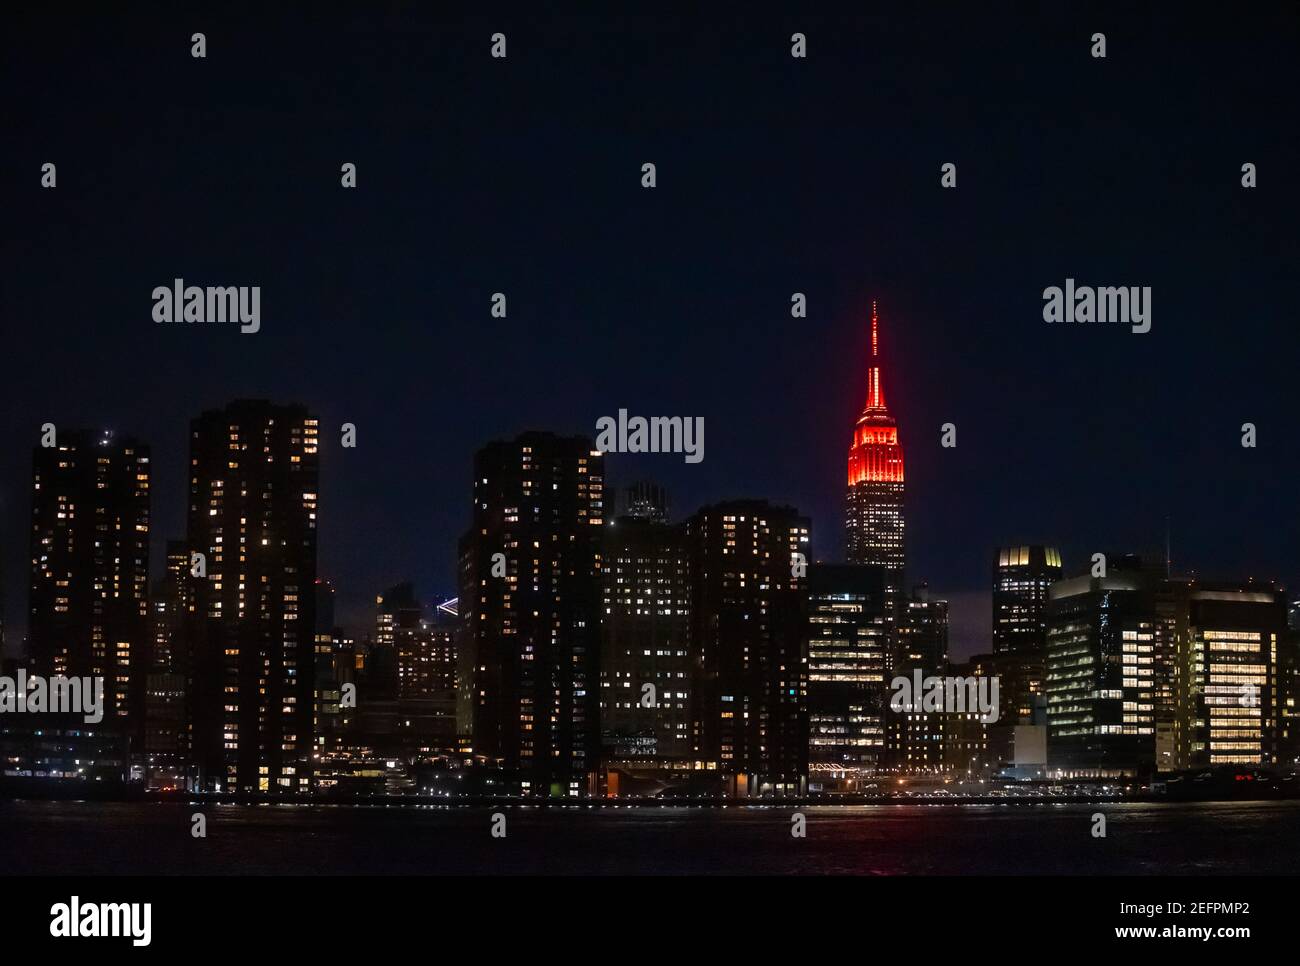 The Empire State Building is illuminated in red to celebrate the upcoming landing of the NASA Perseverance rover on the surface of Mars February 16, 2021 in New York City. Perseverance will search for signs of ancient microbial life. Credit: Planetpix/Alamy Live News Stock Photo